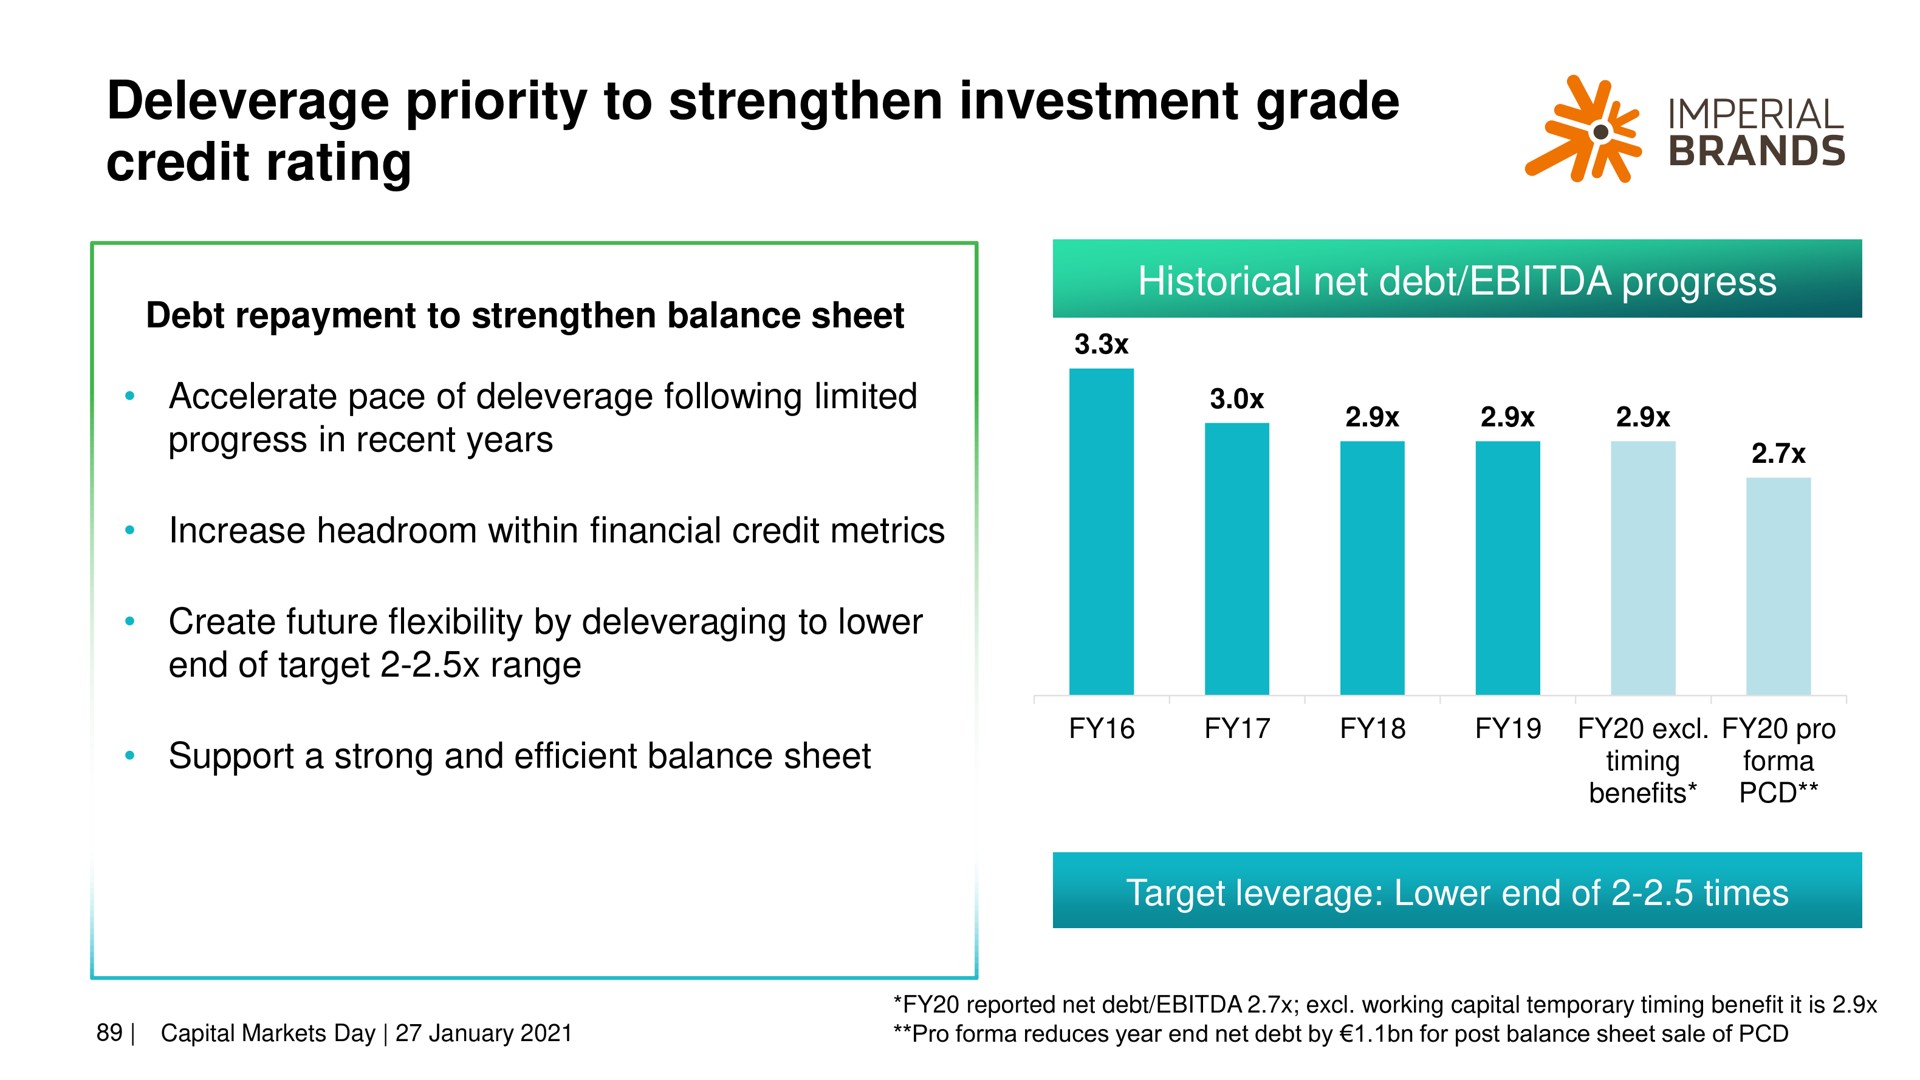 priority to strengthen investment grade credit rating me imperial alf brands | Imperial Brands